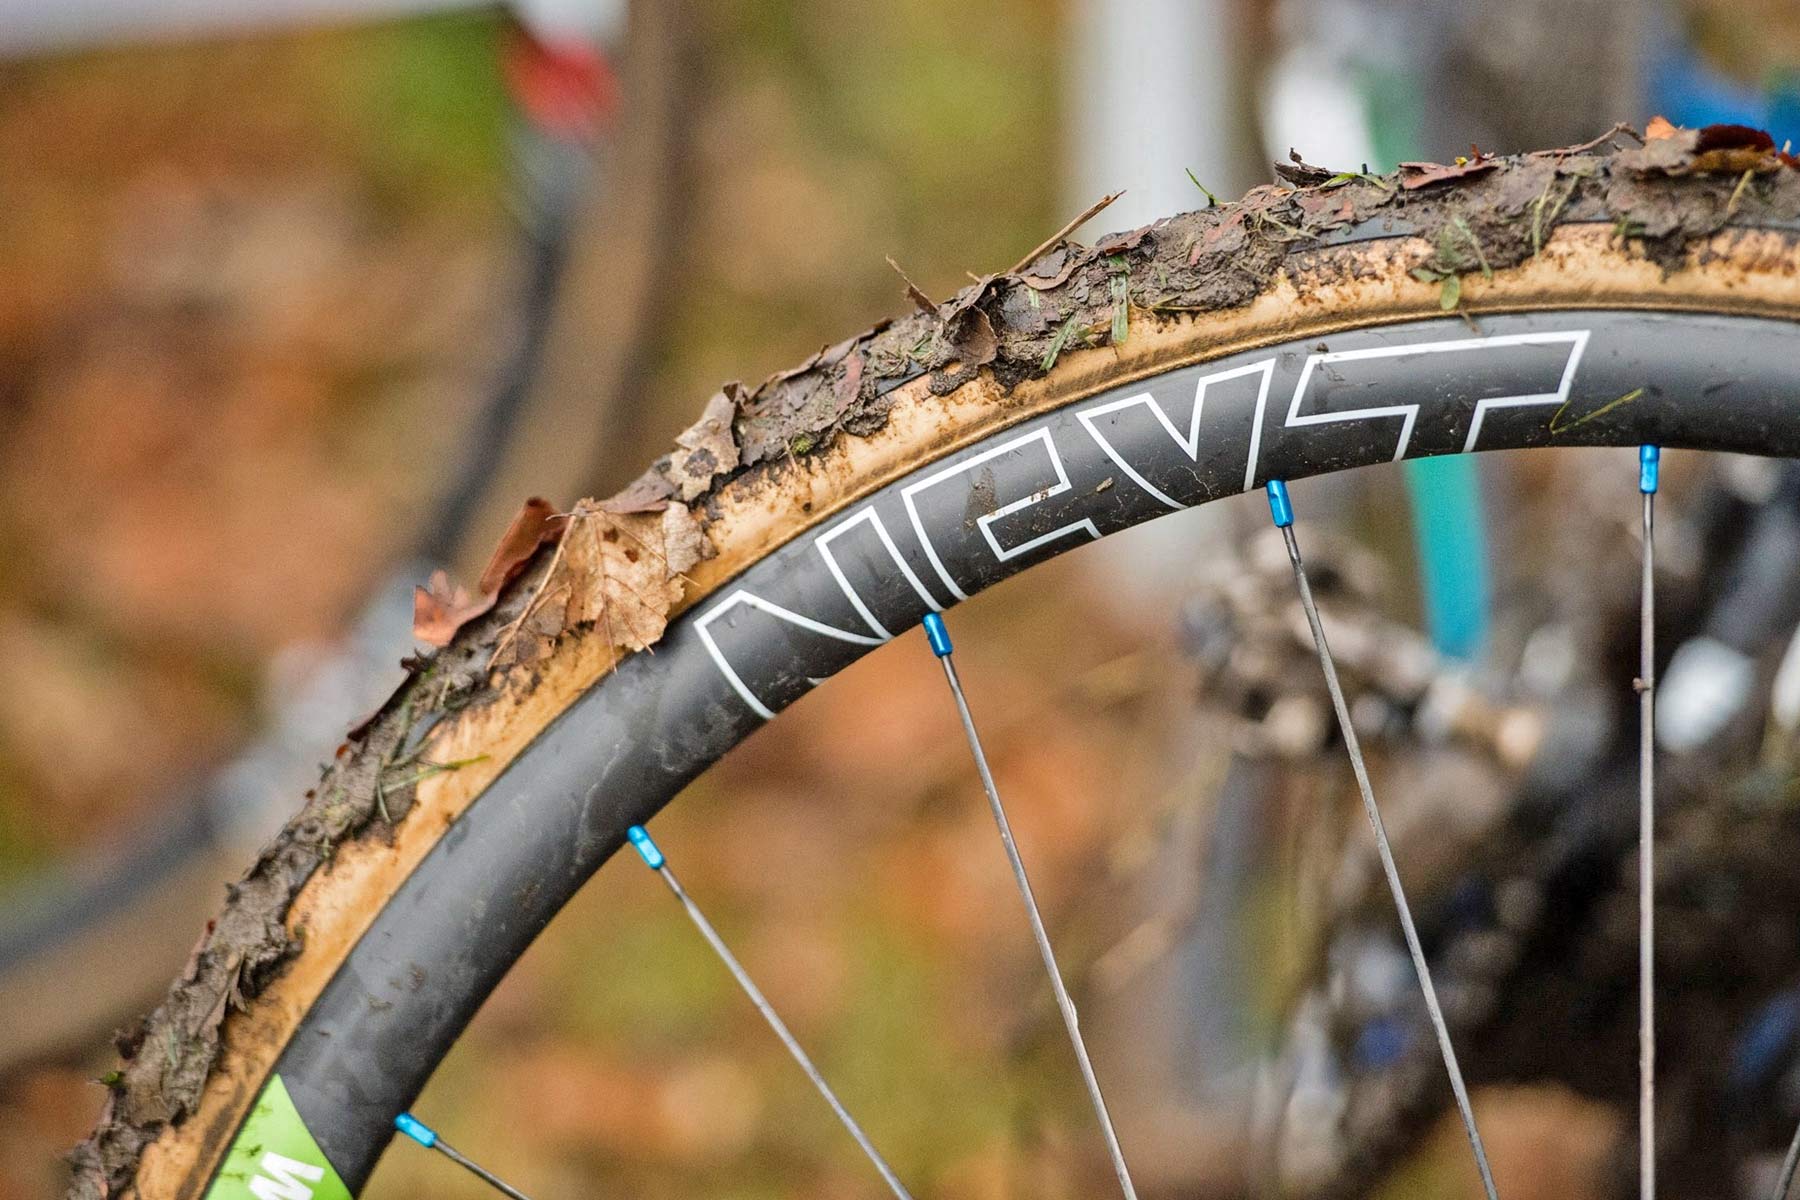 NEXT Free carbon rims for life